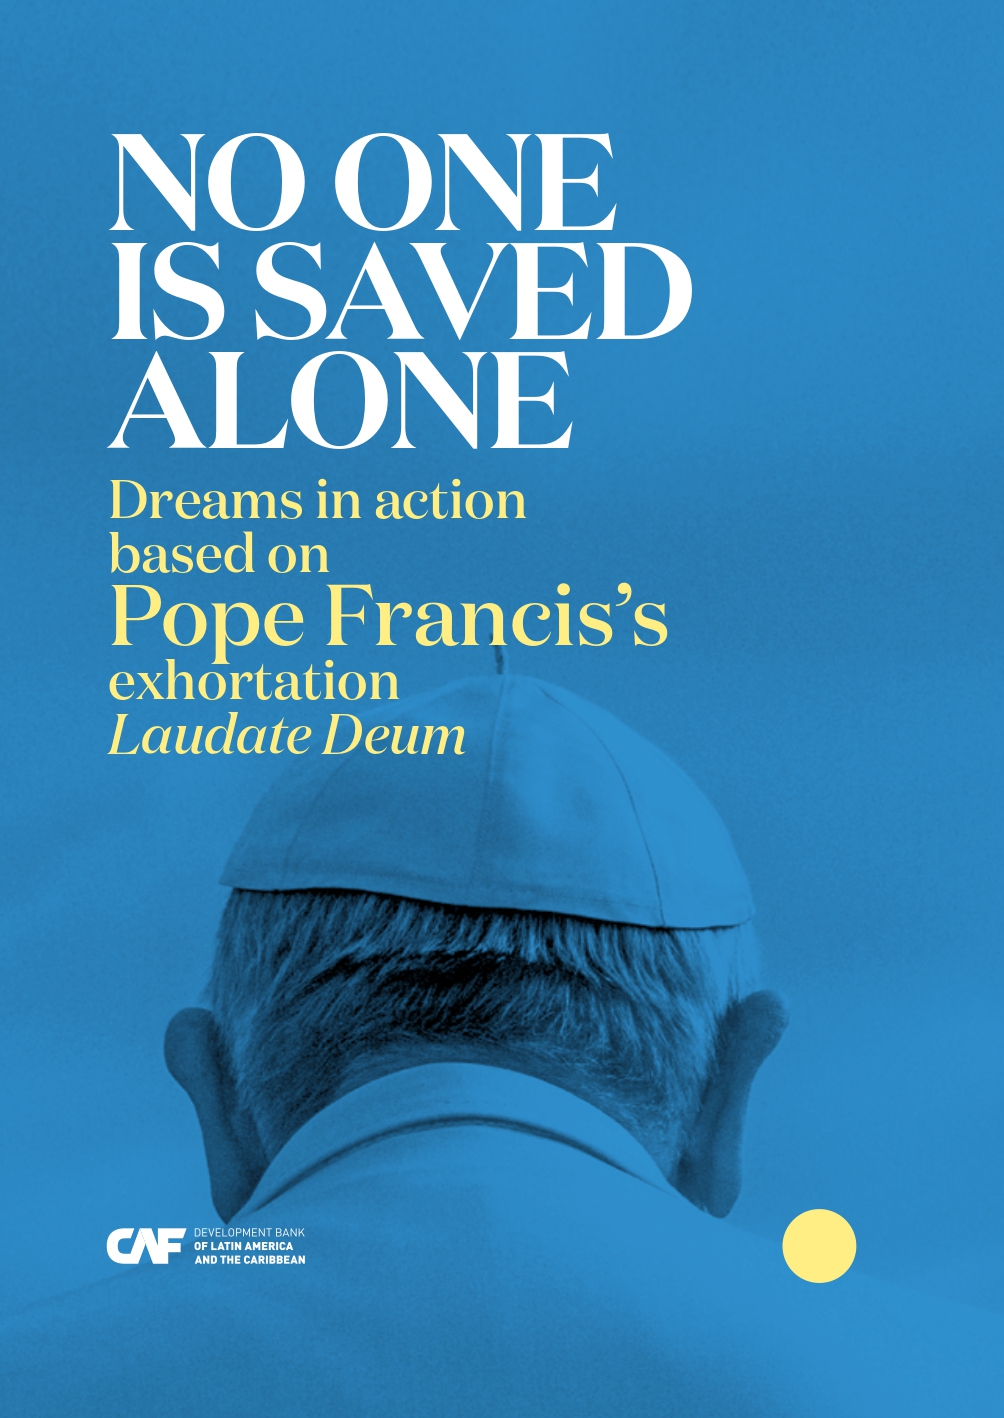 Nobody is saved alone: dreams in action based on Pope Francis's exhortation Laudate Deum